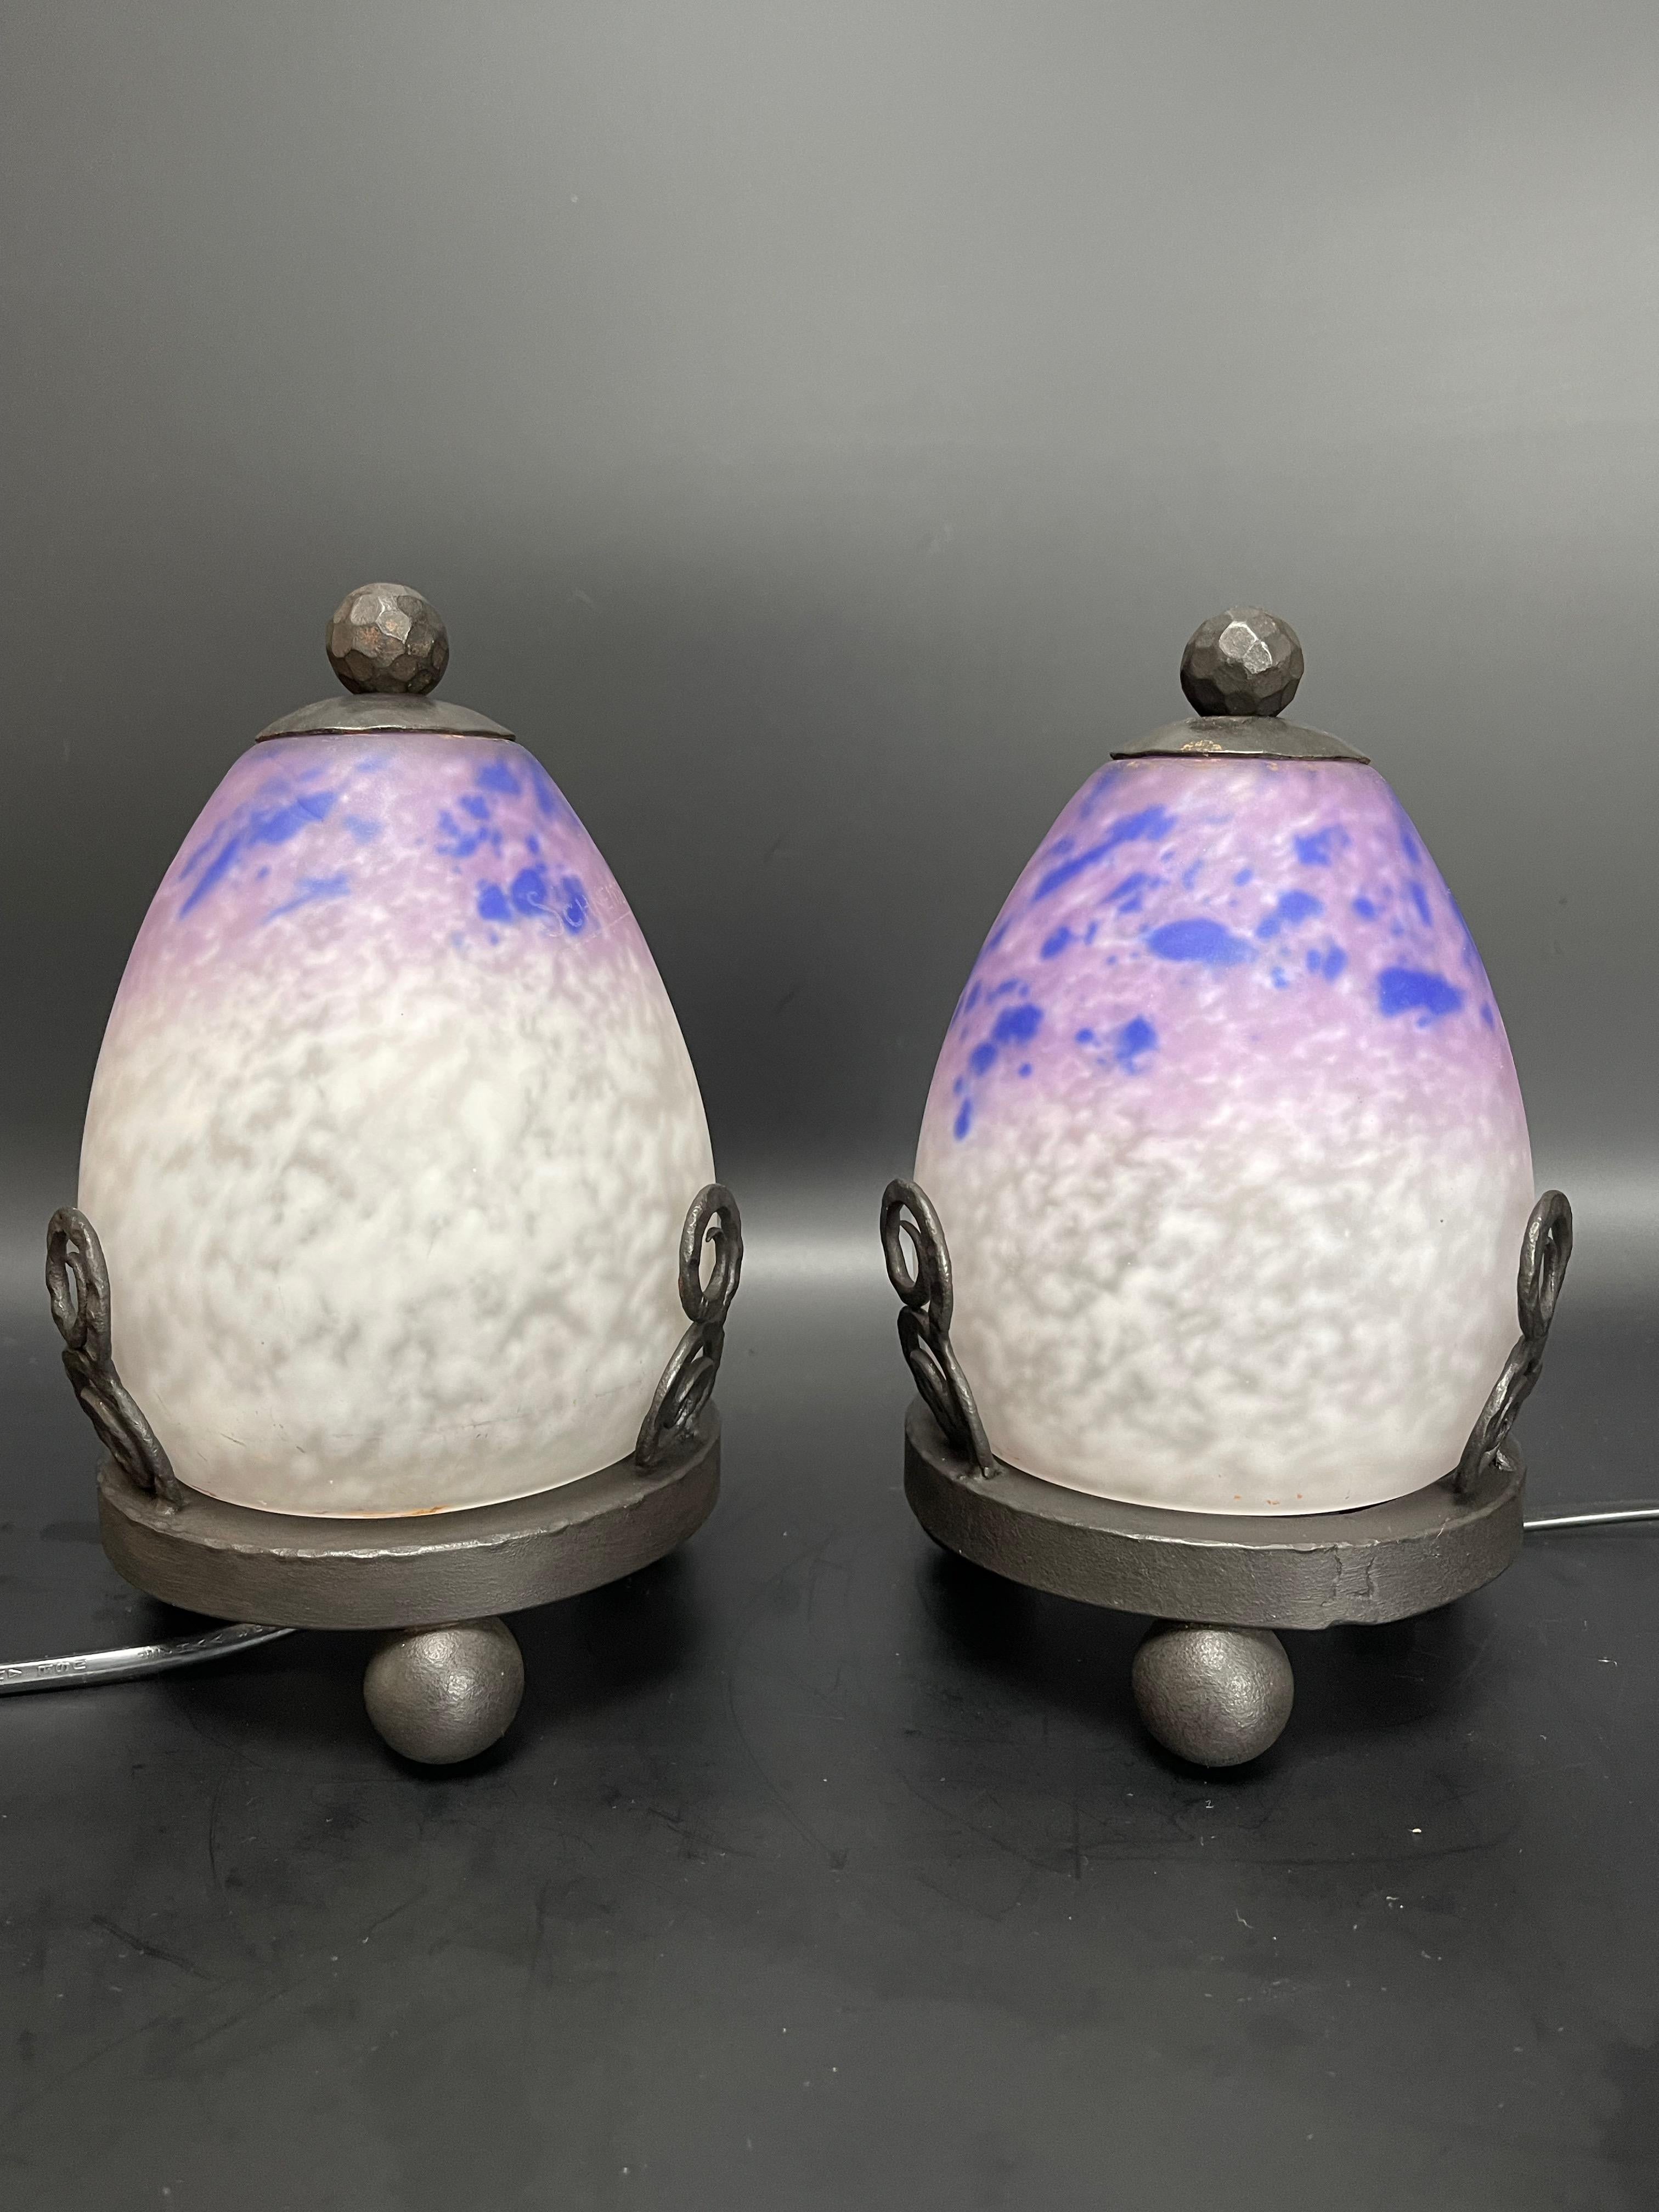 Schneider Pair of Art Deco Night Lights
Pair of Art Deco night lights circa 1925; Tulips signed Schneider purple speckled with blue.
Wrought iron base.
Electrified and in perfect condition.
Height: 18cm
Diameter: 11cm
Weight: 2.5Kg
Charles